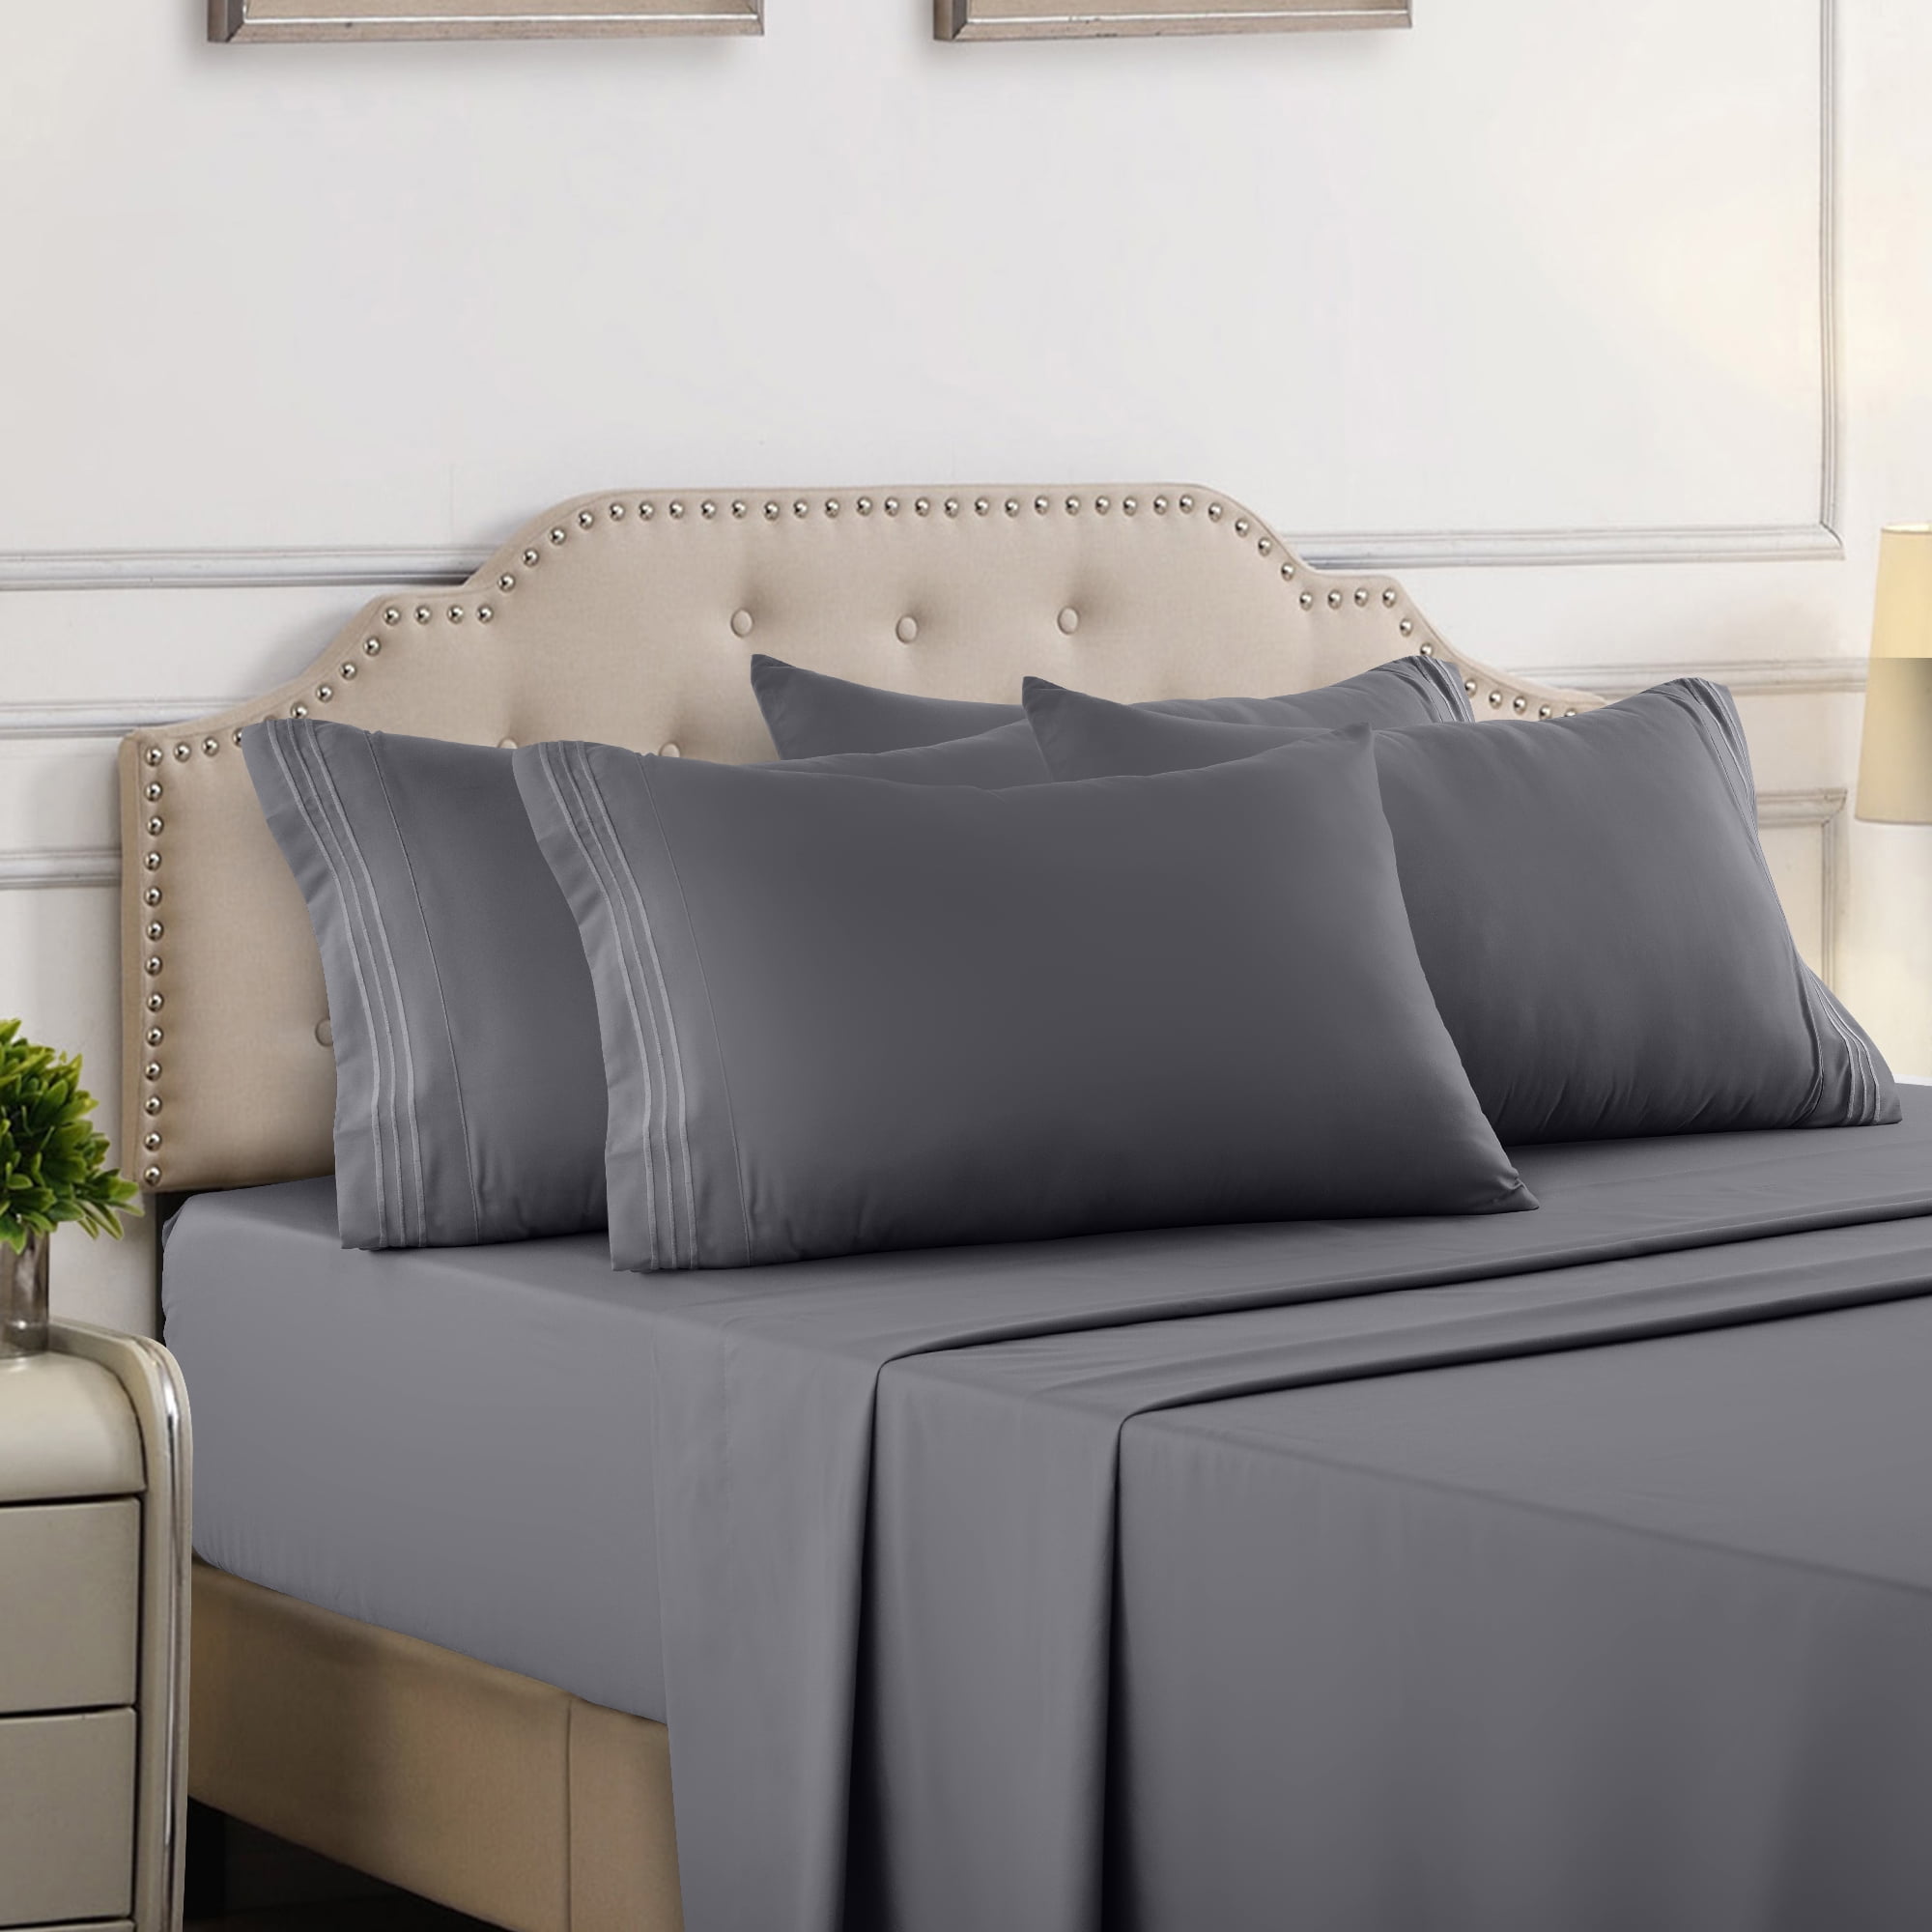 Home Collection Premium Ultra Soft 6 Piece Bed Sheet Set Twin Black